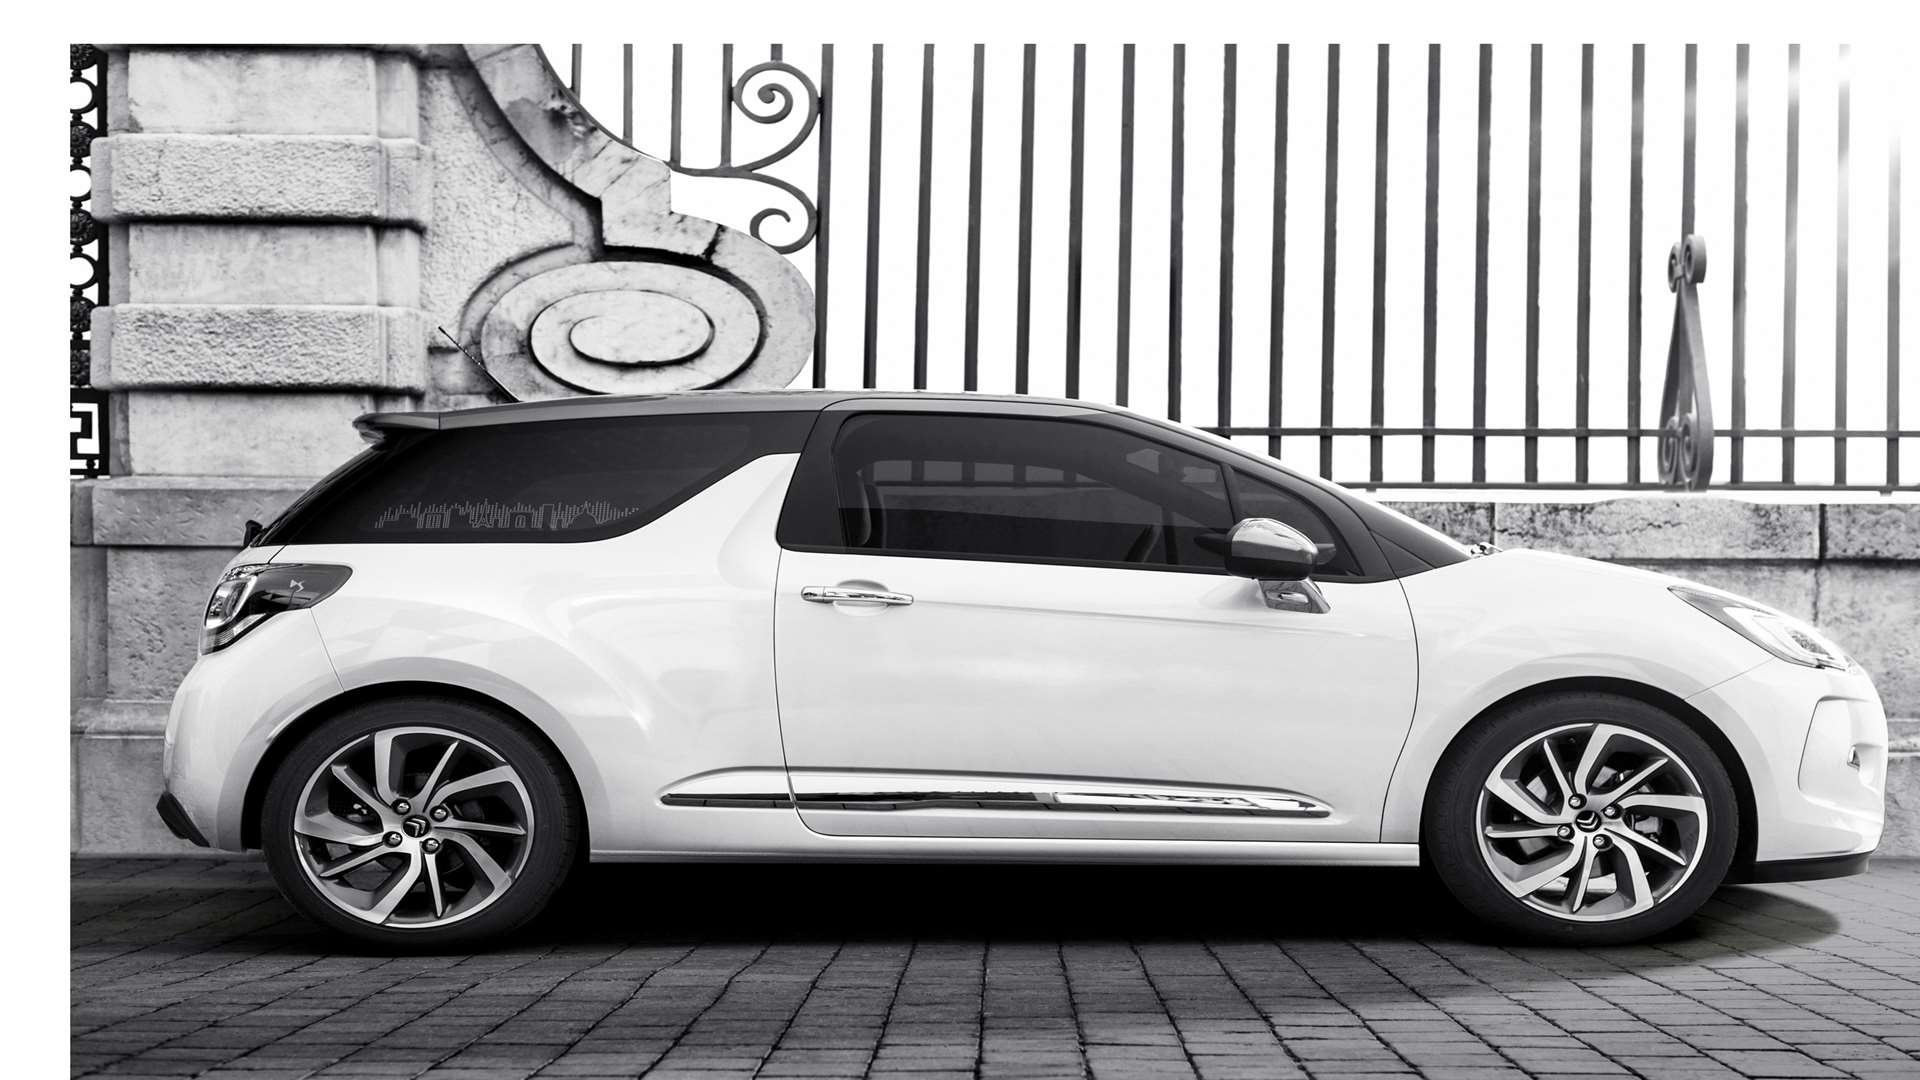 The DS3, the more glamourous, better-looking, three-door version of the C3